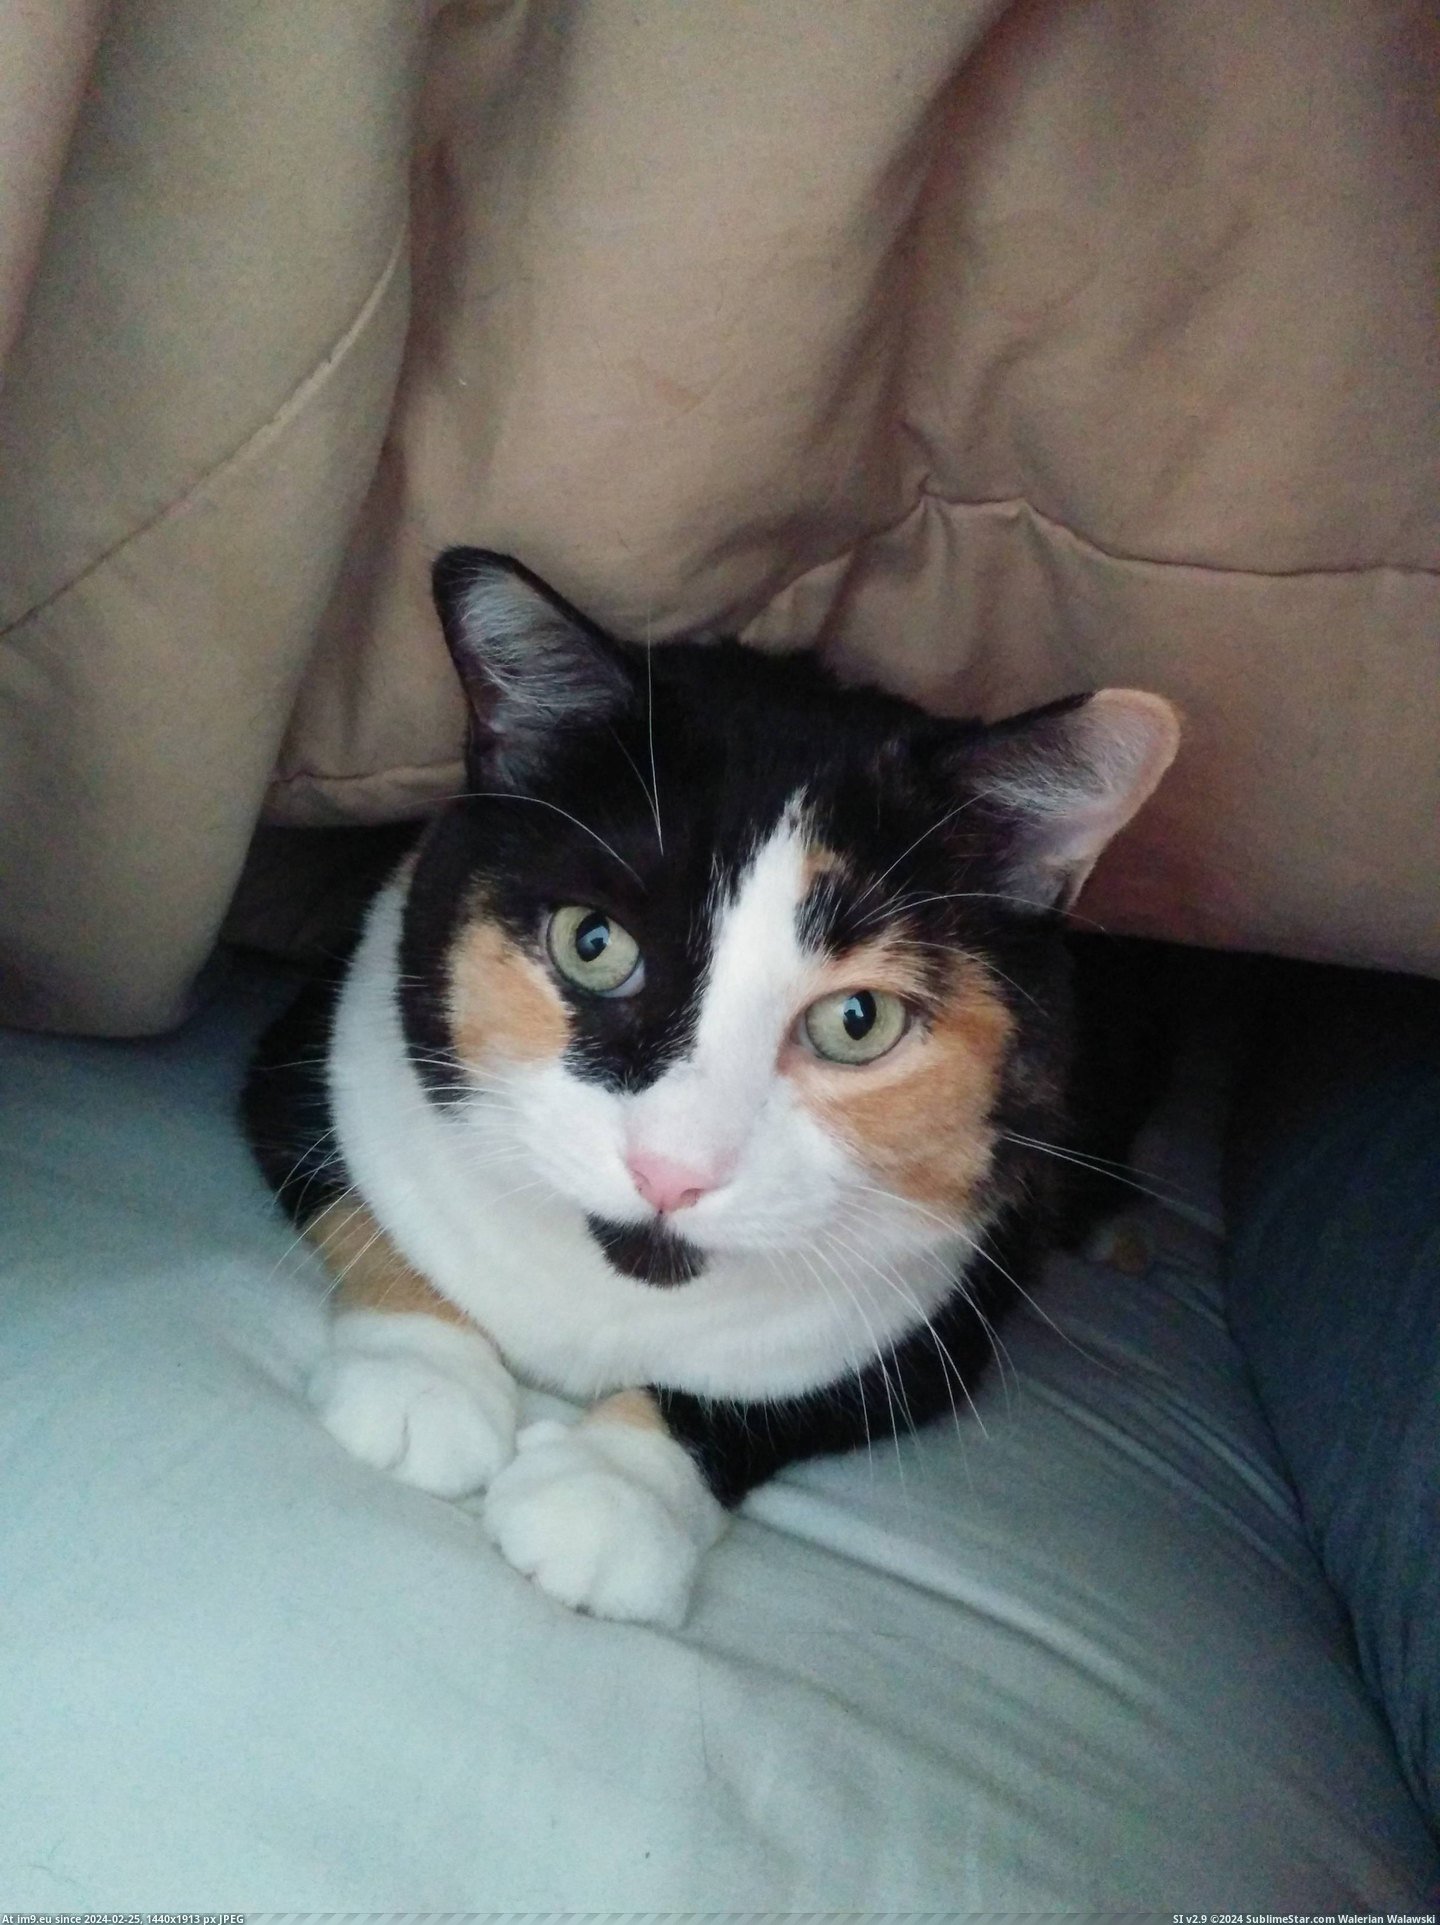 #Cats #Wife #Adorable #Noises #Blankets #Pushes #Chirping #Attention #Pay #Tunnels [Cats] She pushes my wife and I apart, tunnels under the blankets, and makes adorable chirping noises until we pay attention to  Pic. (Image of album My r/CATS favs))